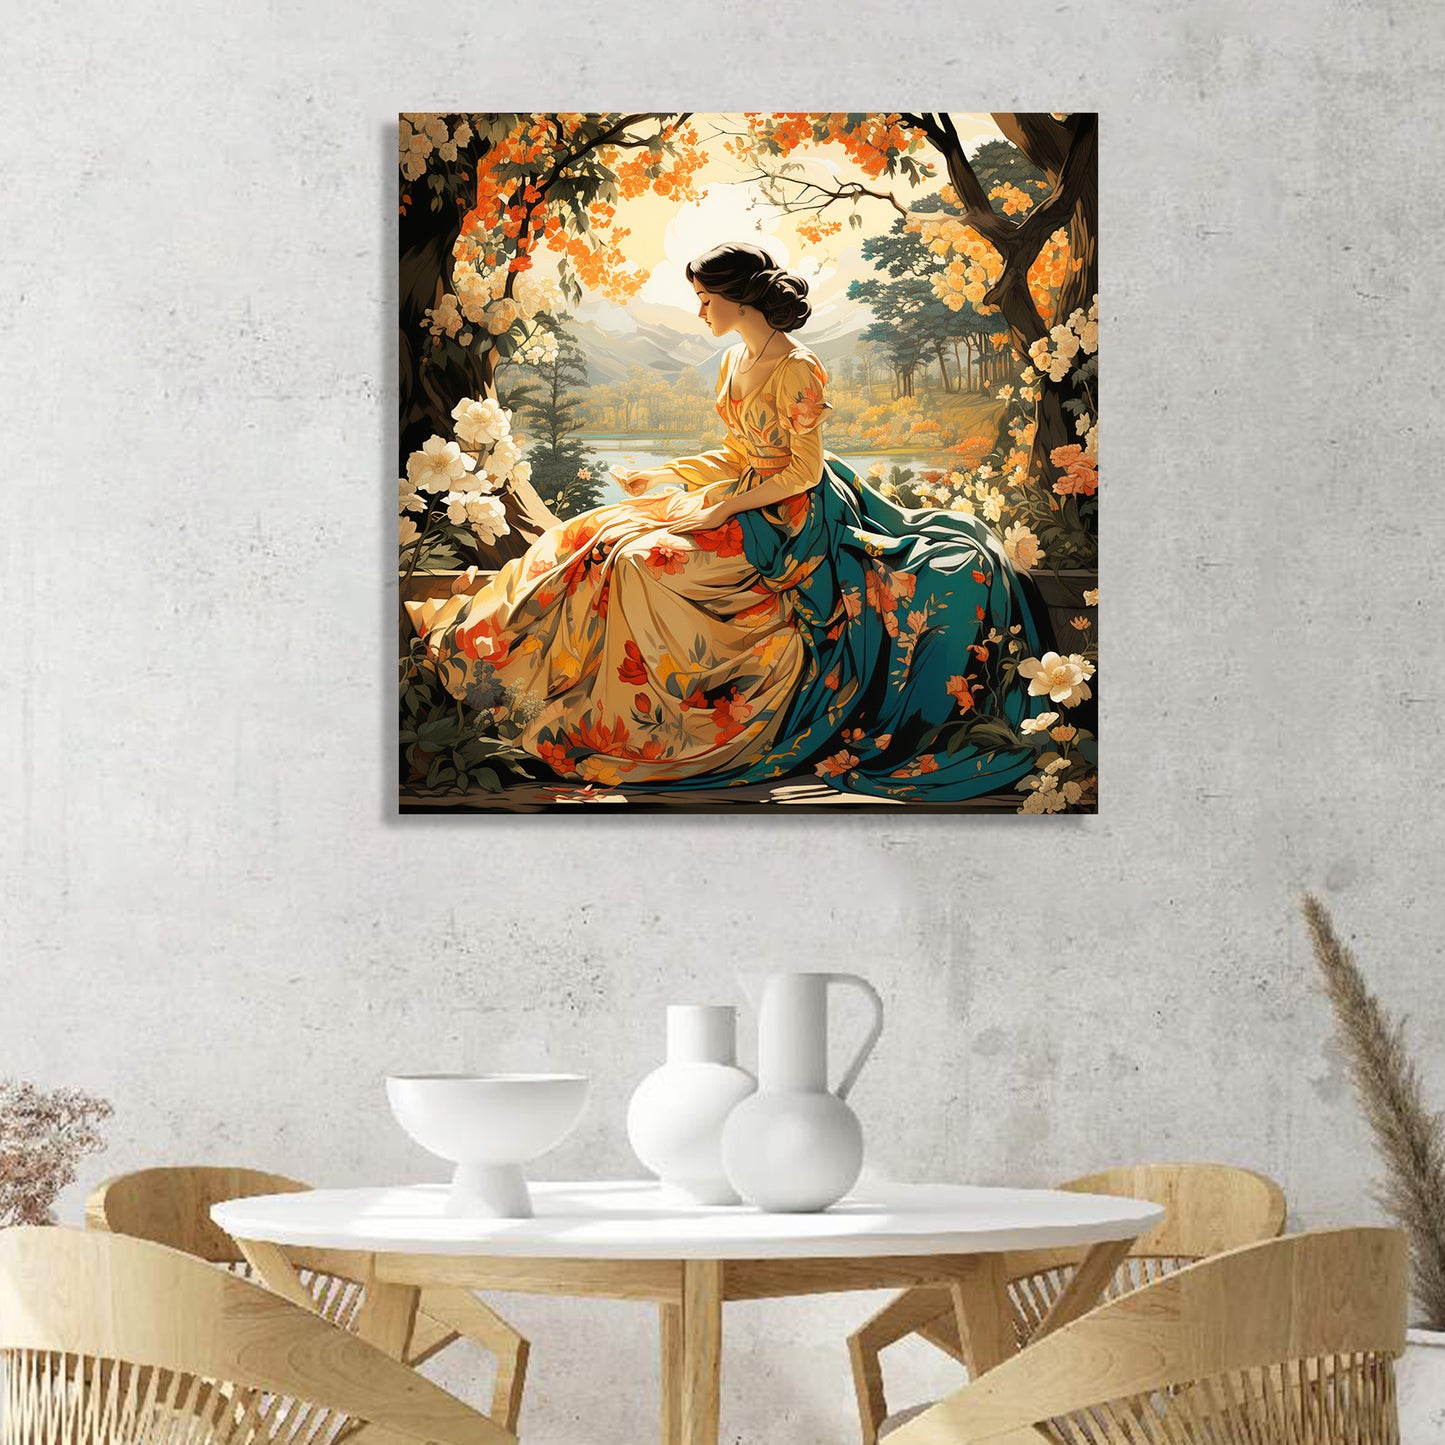 Modern Art Canvas Painting for Living Room Bedroom Home and Office Wall Decor